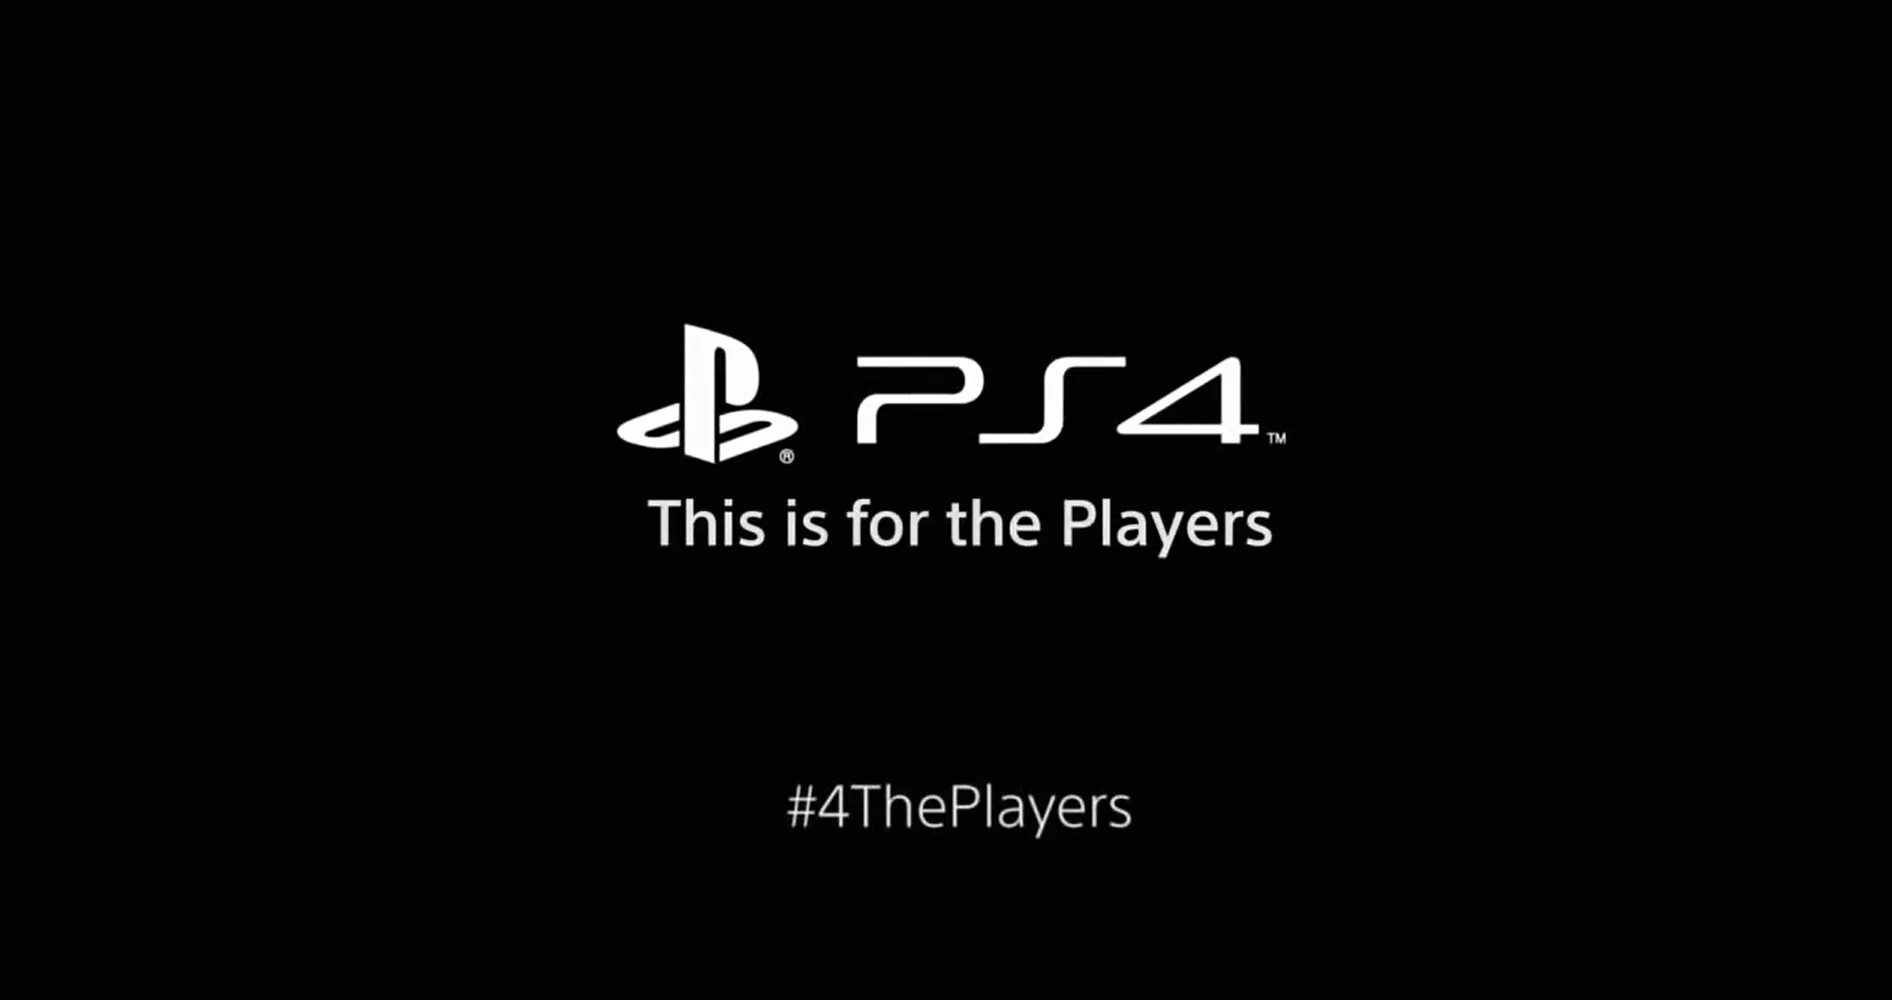 Video enter. For the Players PLAYSTATION. Ps4 for the Players. PLAYSTATION надпись. This is for the Players.